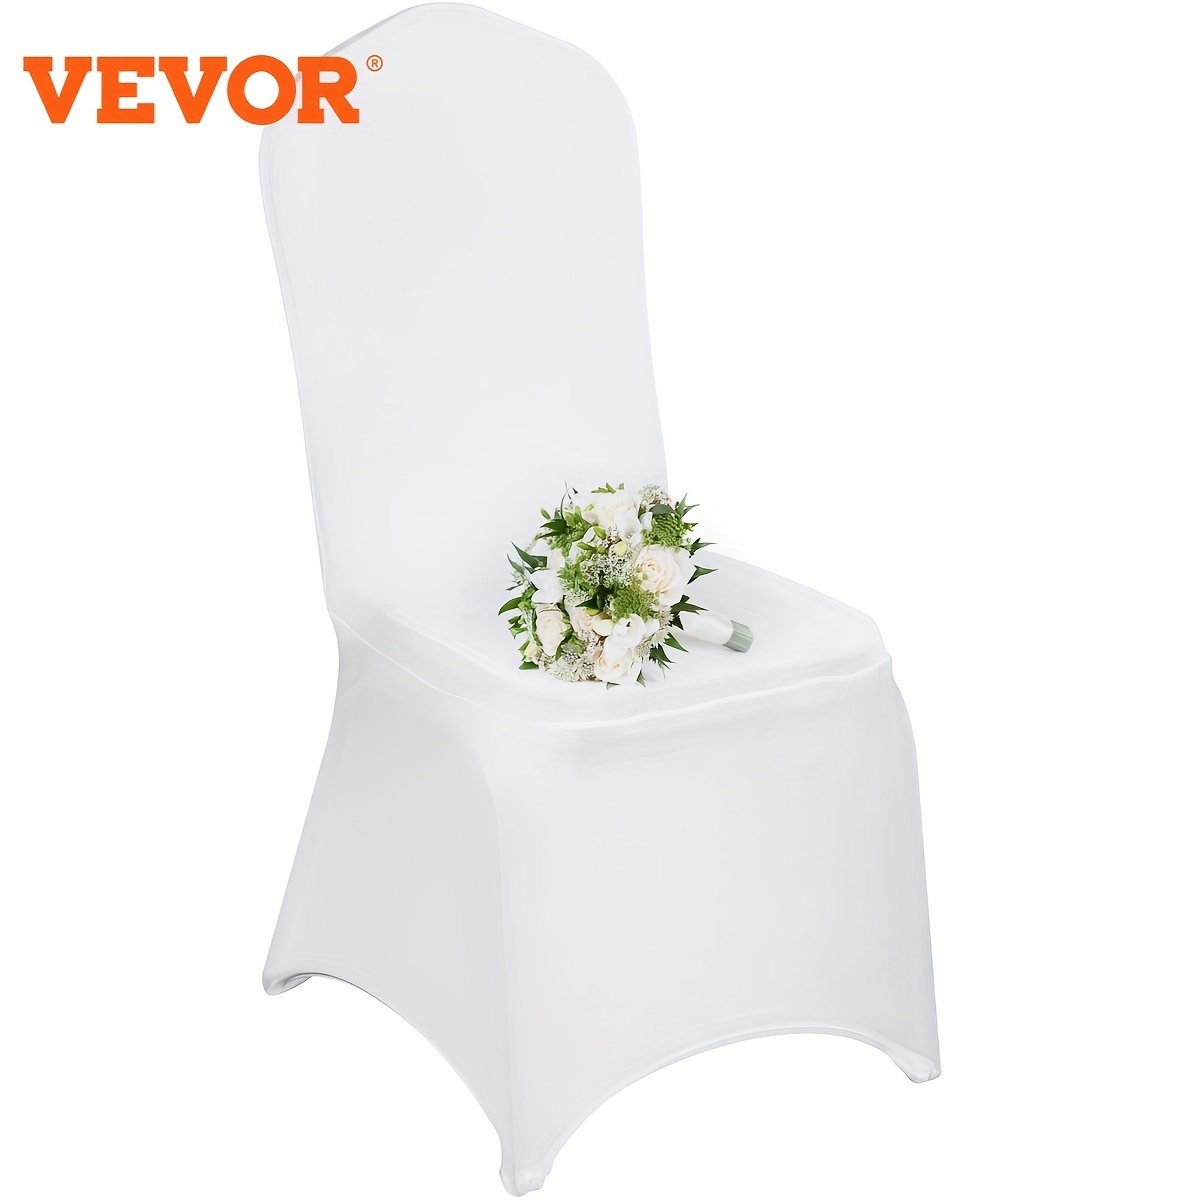 

Vevor 100 Pcs White Chair Covers Polyester Spandex Chair Cover Stretch Slipcovers For Wedding Party Dining Banquet Flat-front Chair Covers